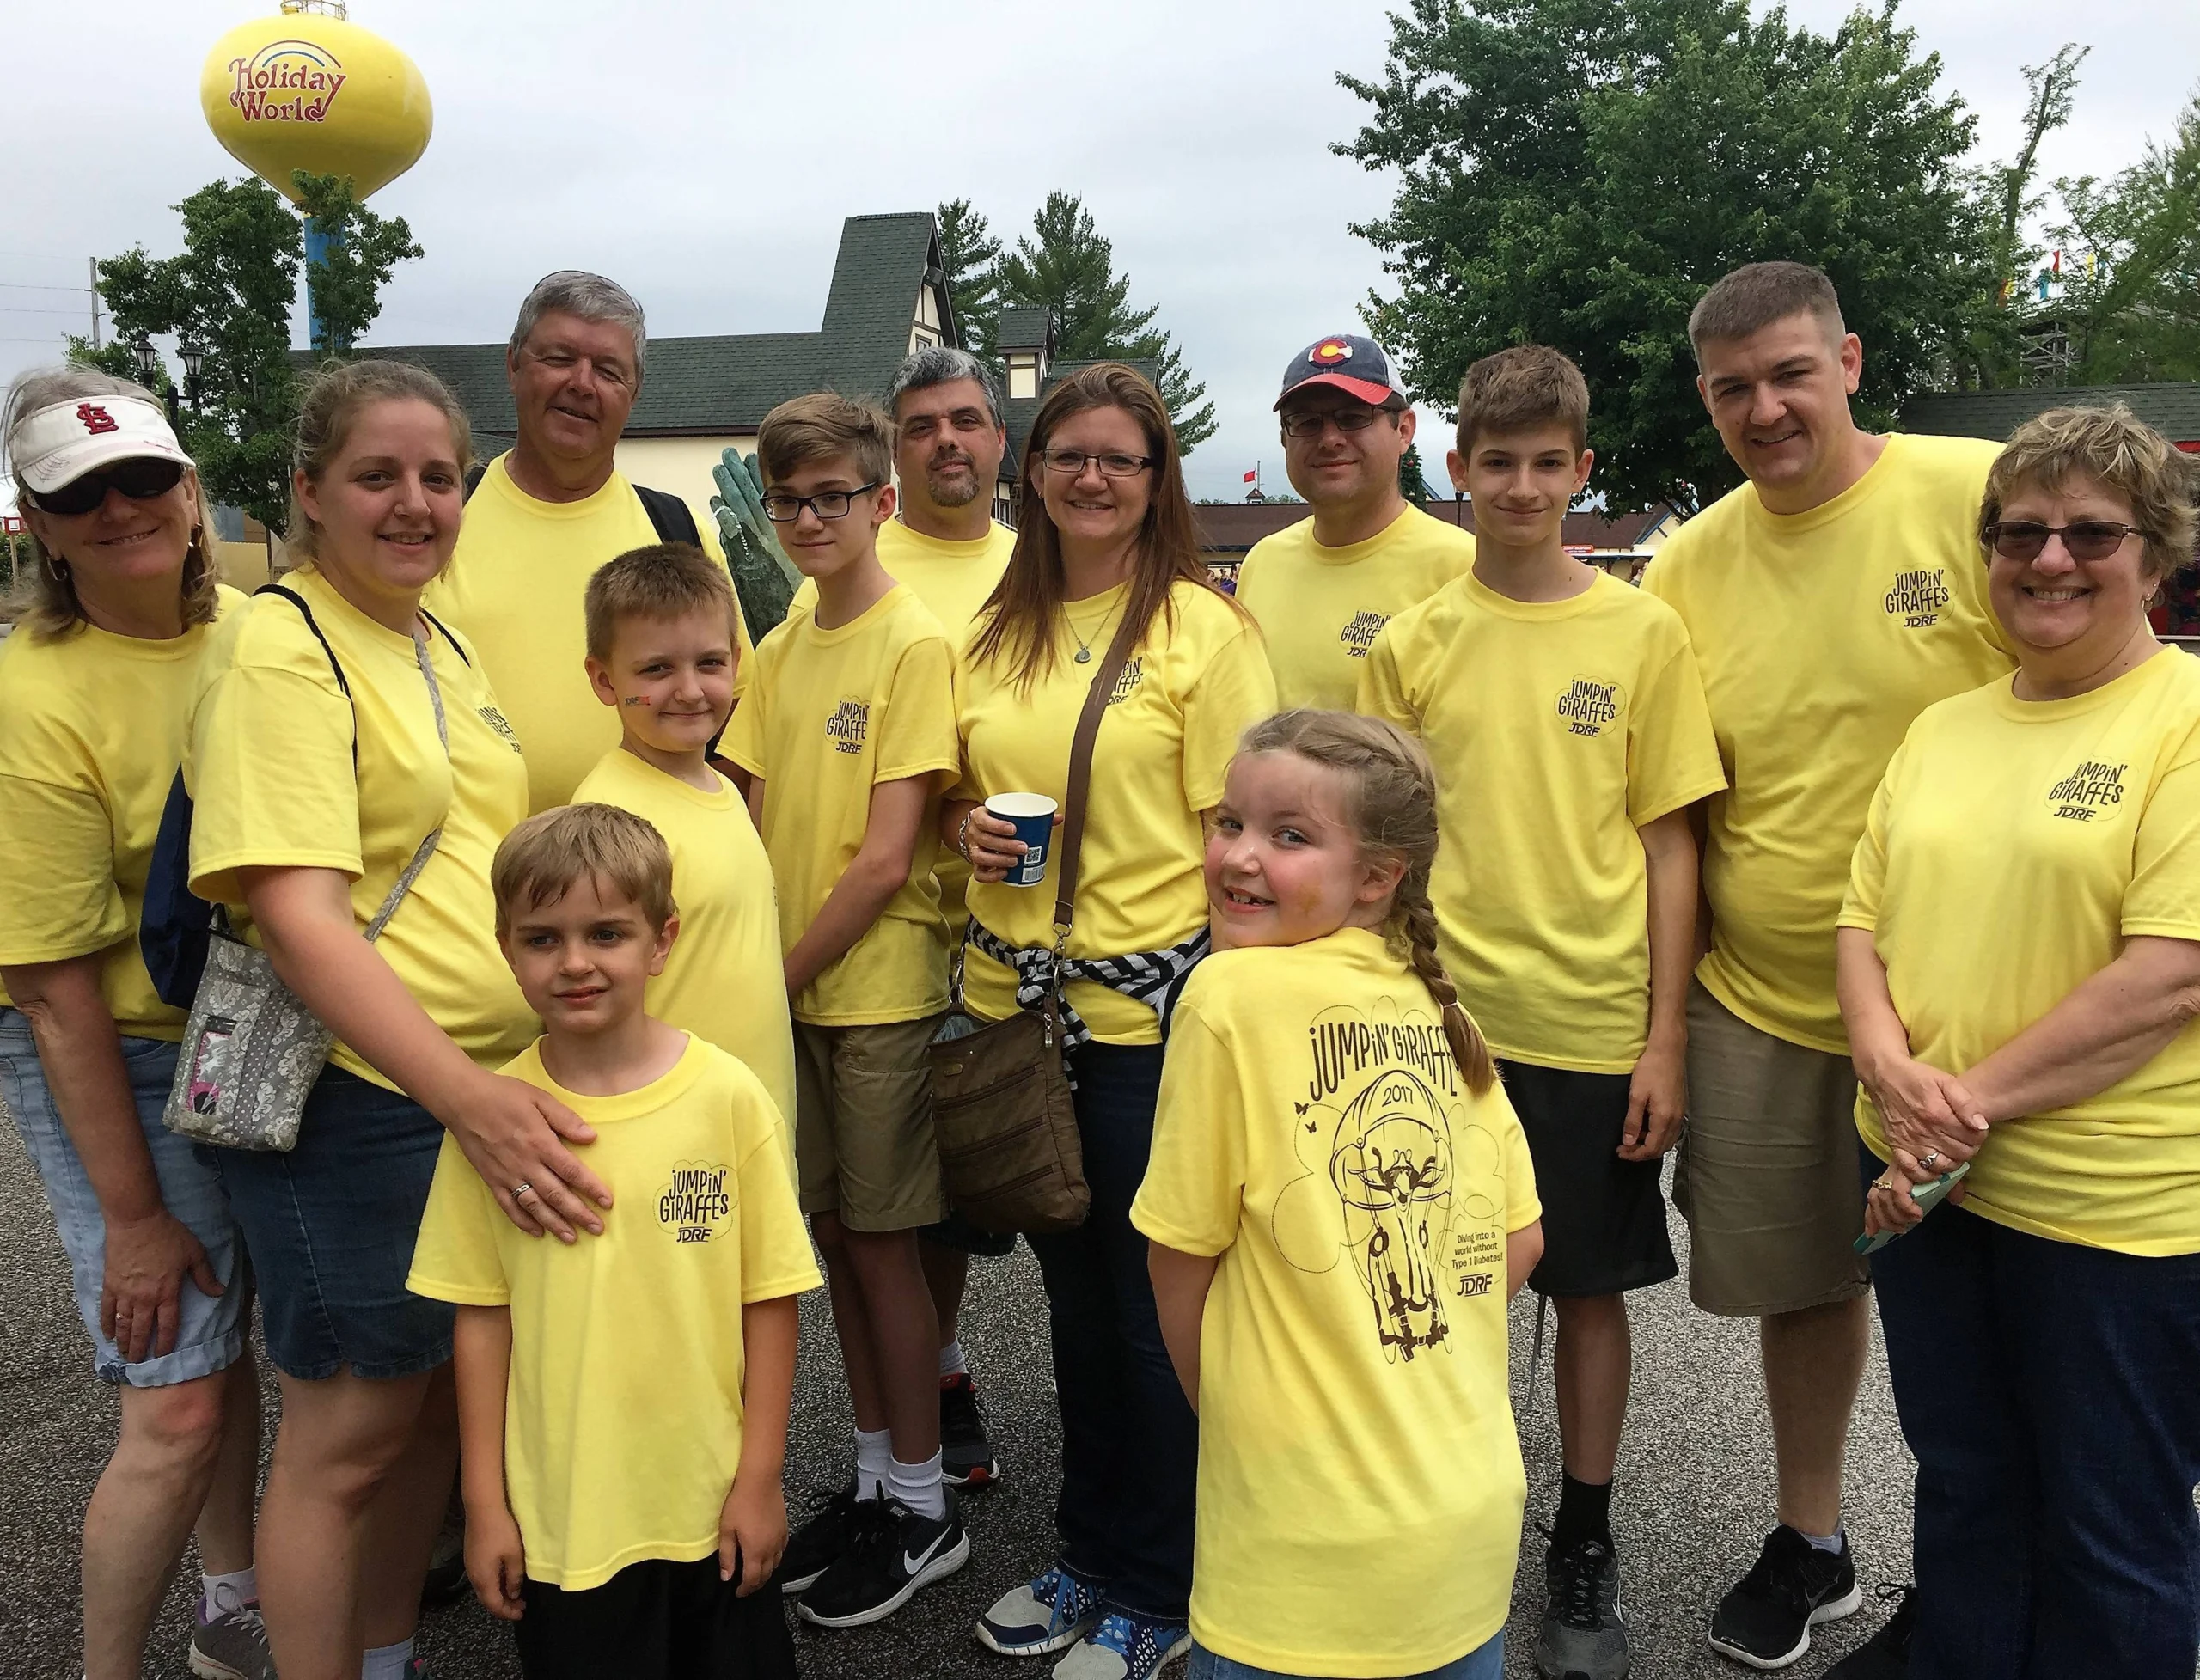 A group shows off their team shirts during the JDRF "One Walk" at Holiday World.